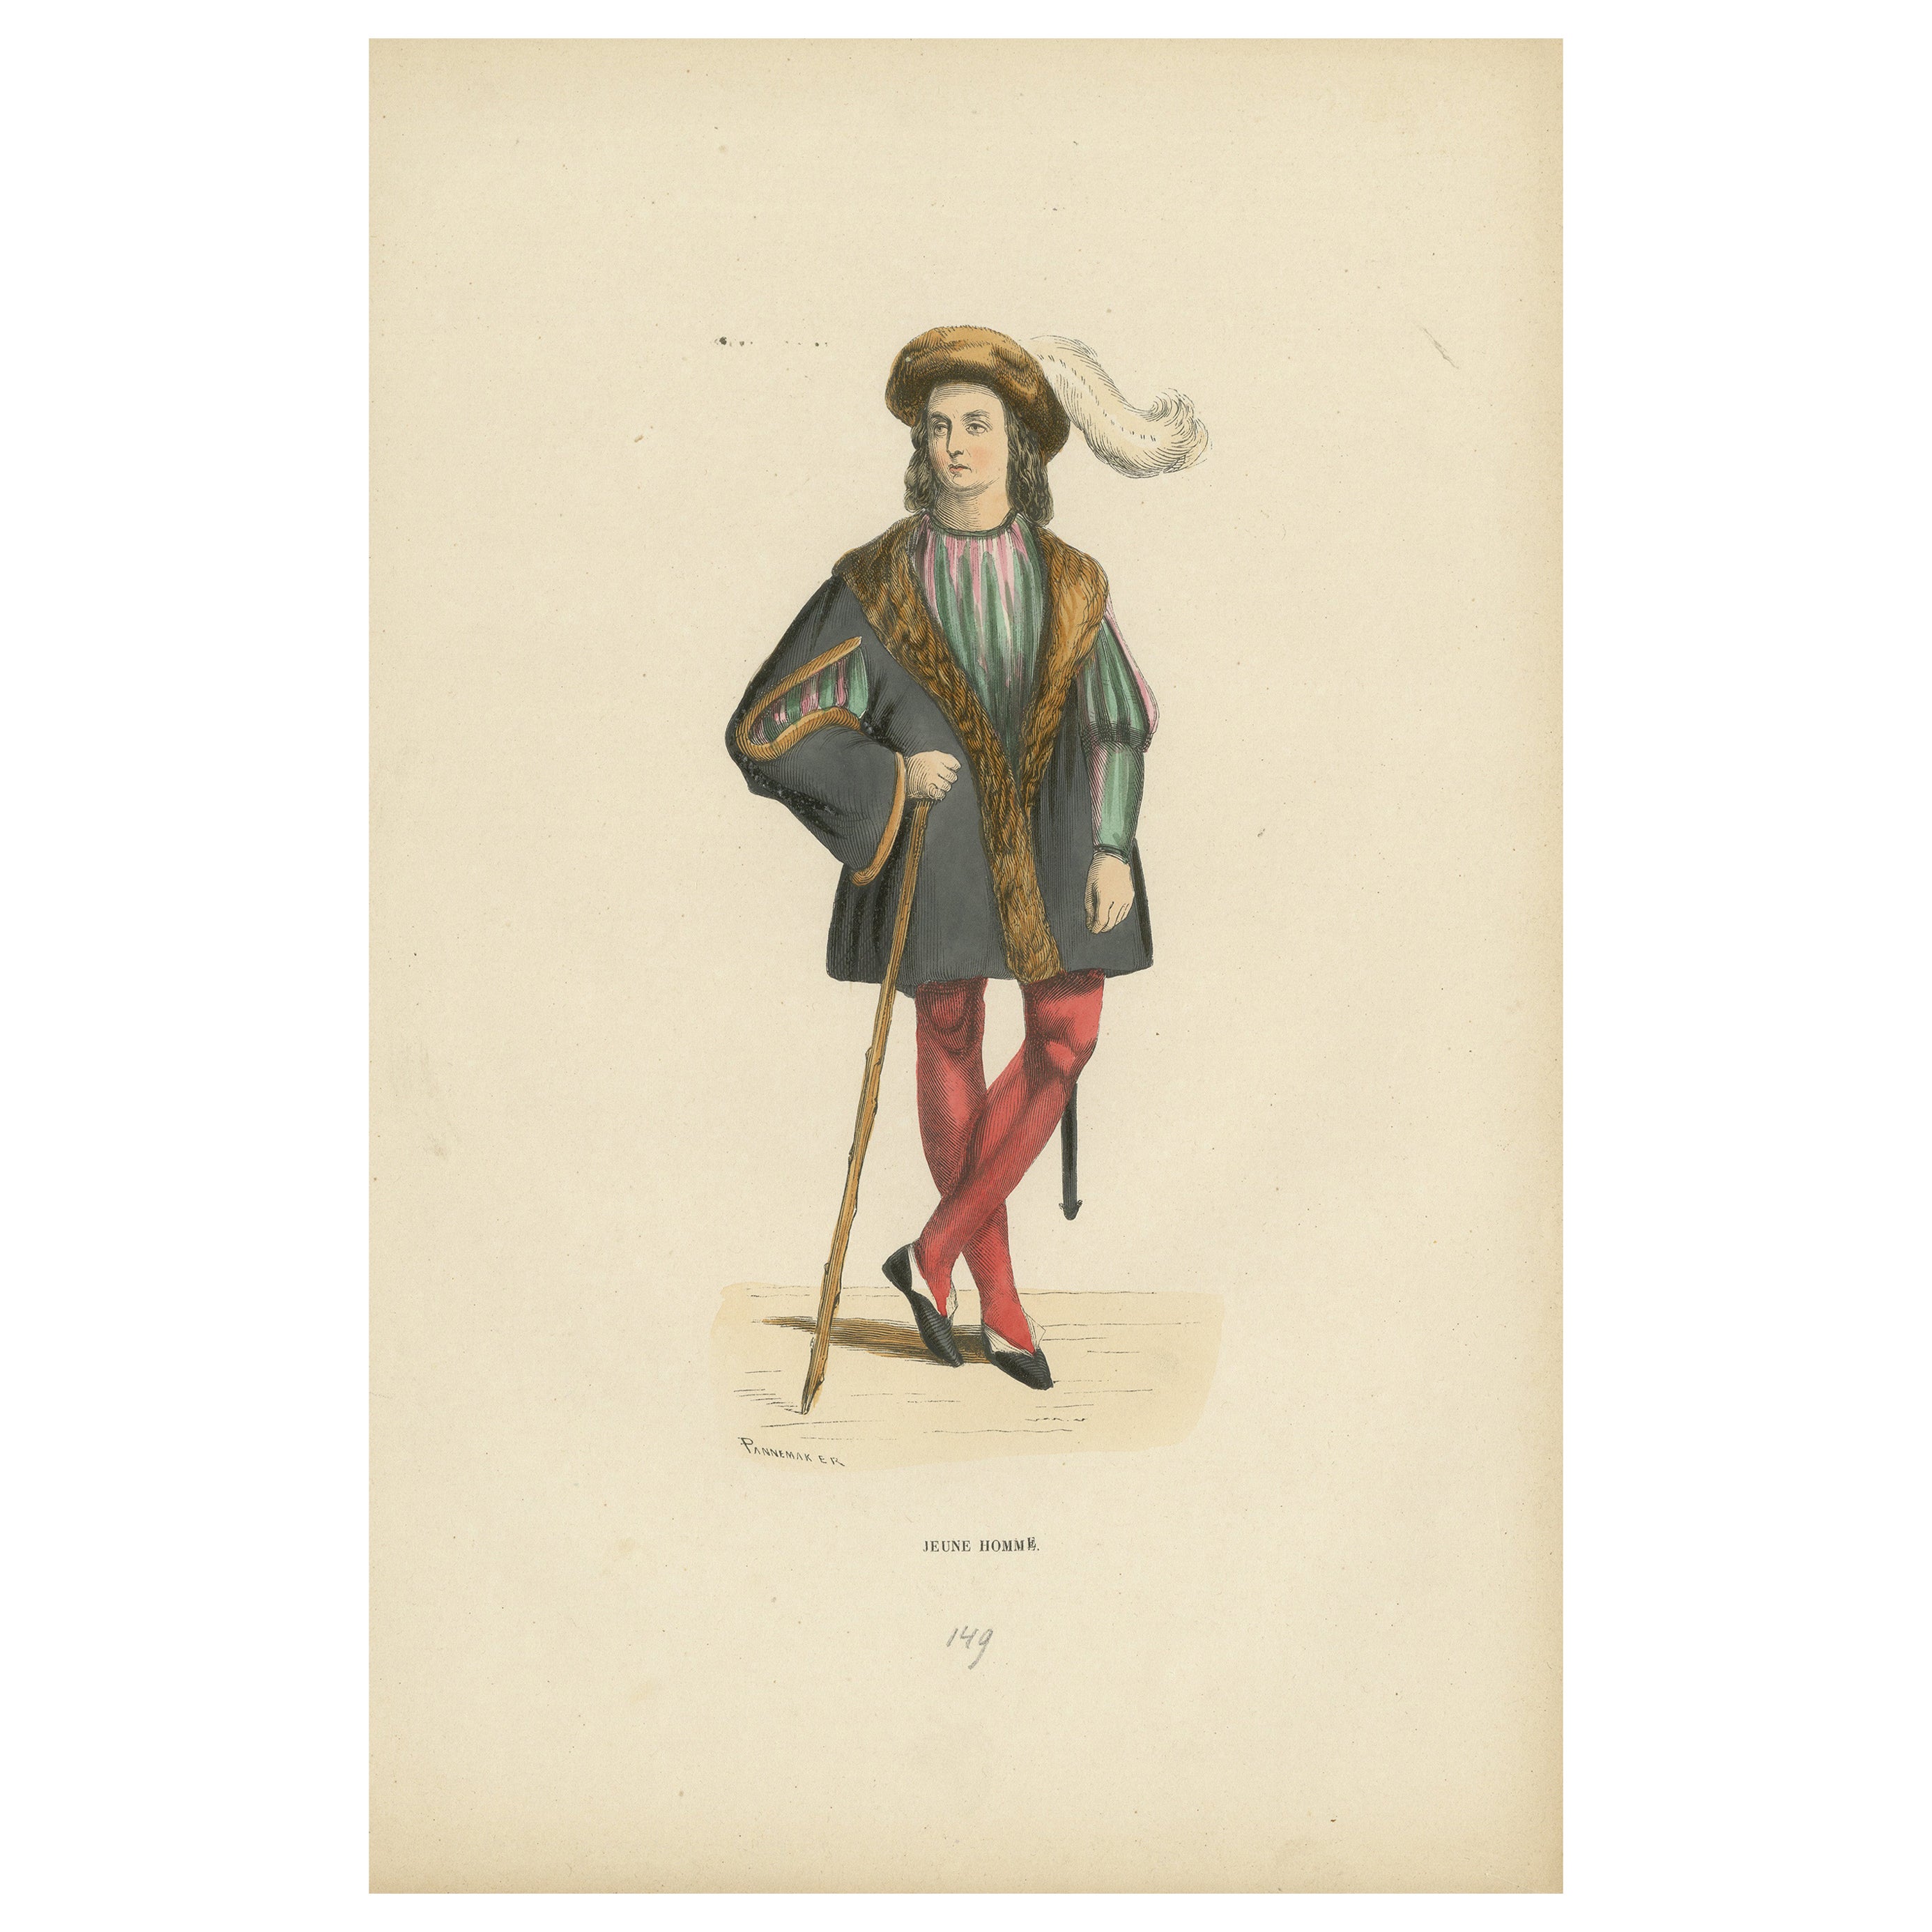 Youthful Elegance: A Young Gentleman's Attire in 'Costume du Moyen Âge', 1847